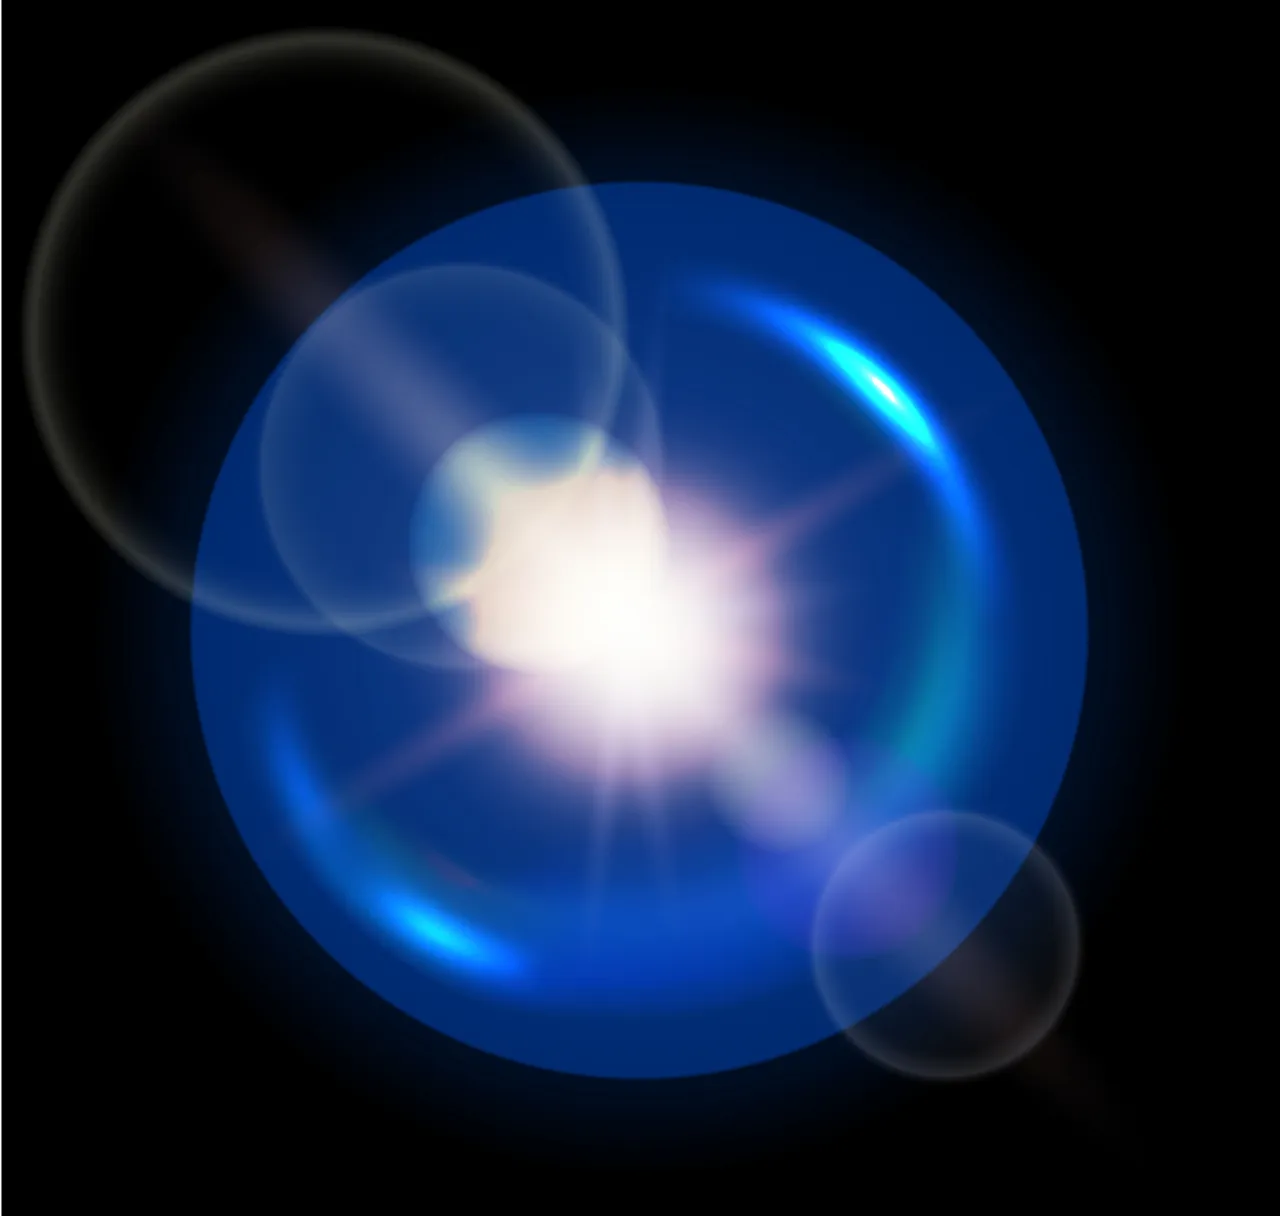 a blurry image of a bright blue object